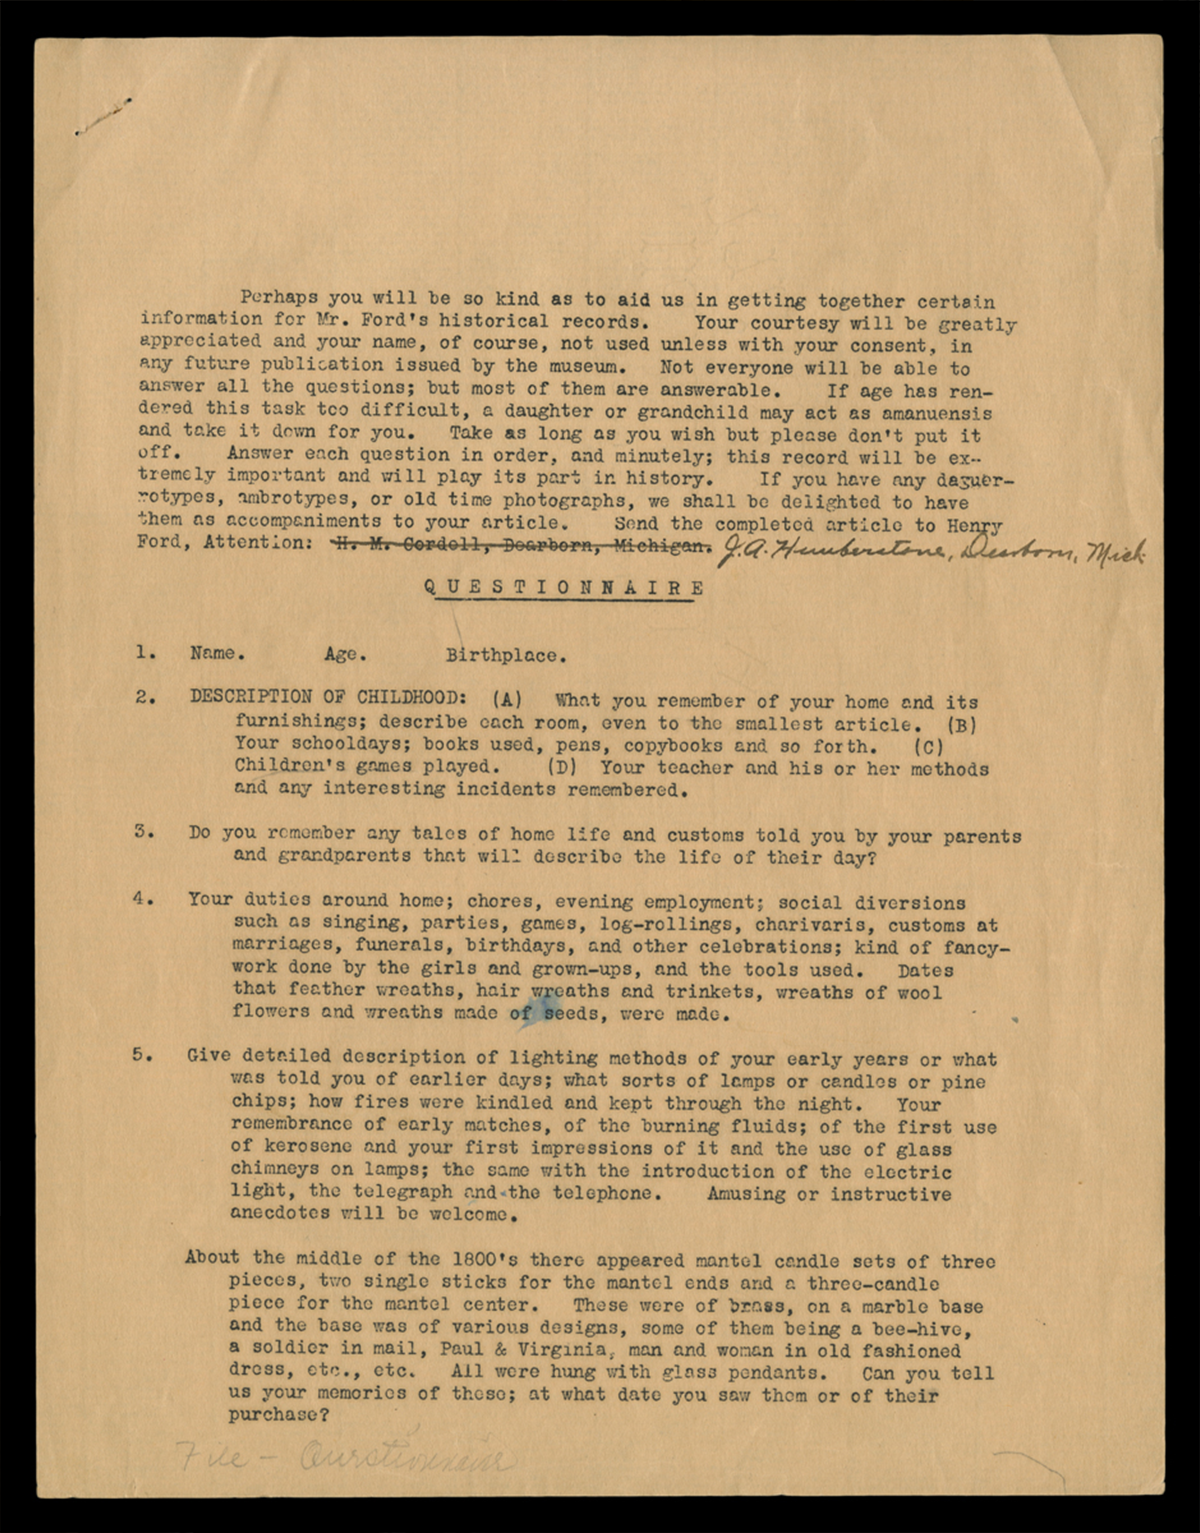 Questionnaire for Edison Institute Historical Records, 1929 (Page 1) 